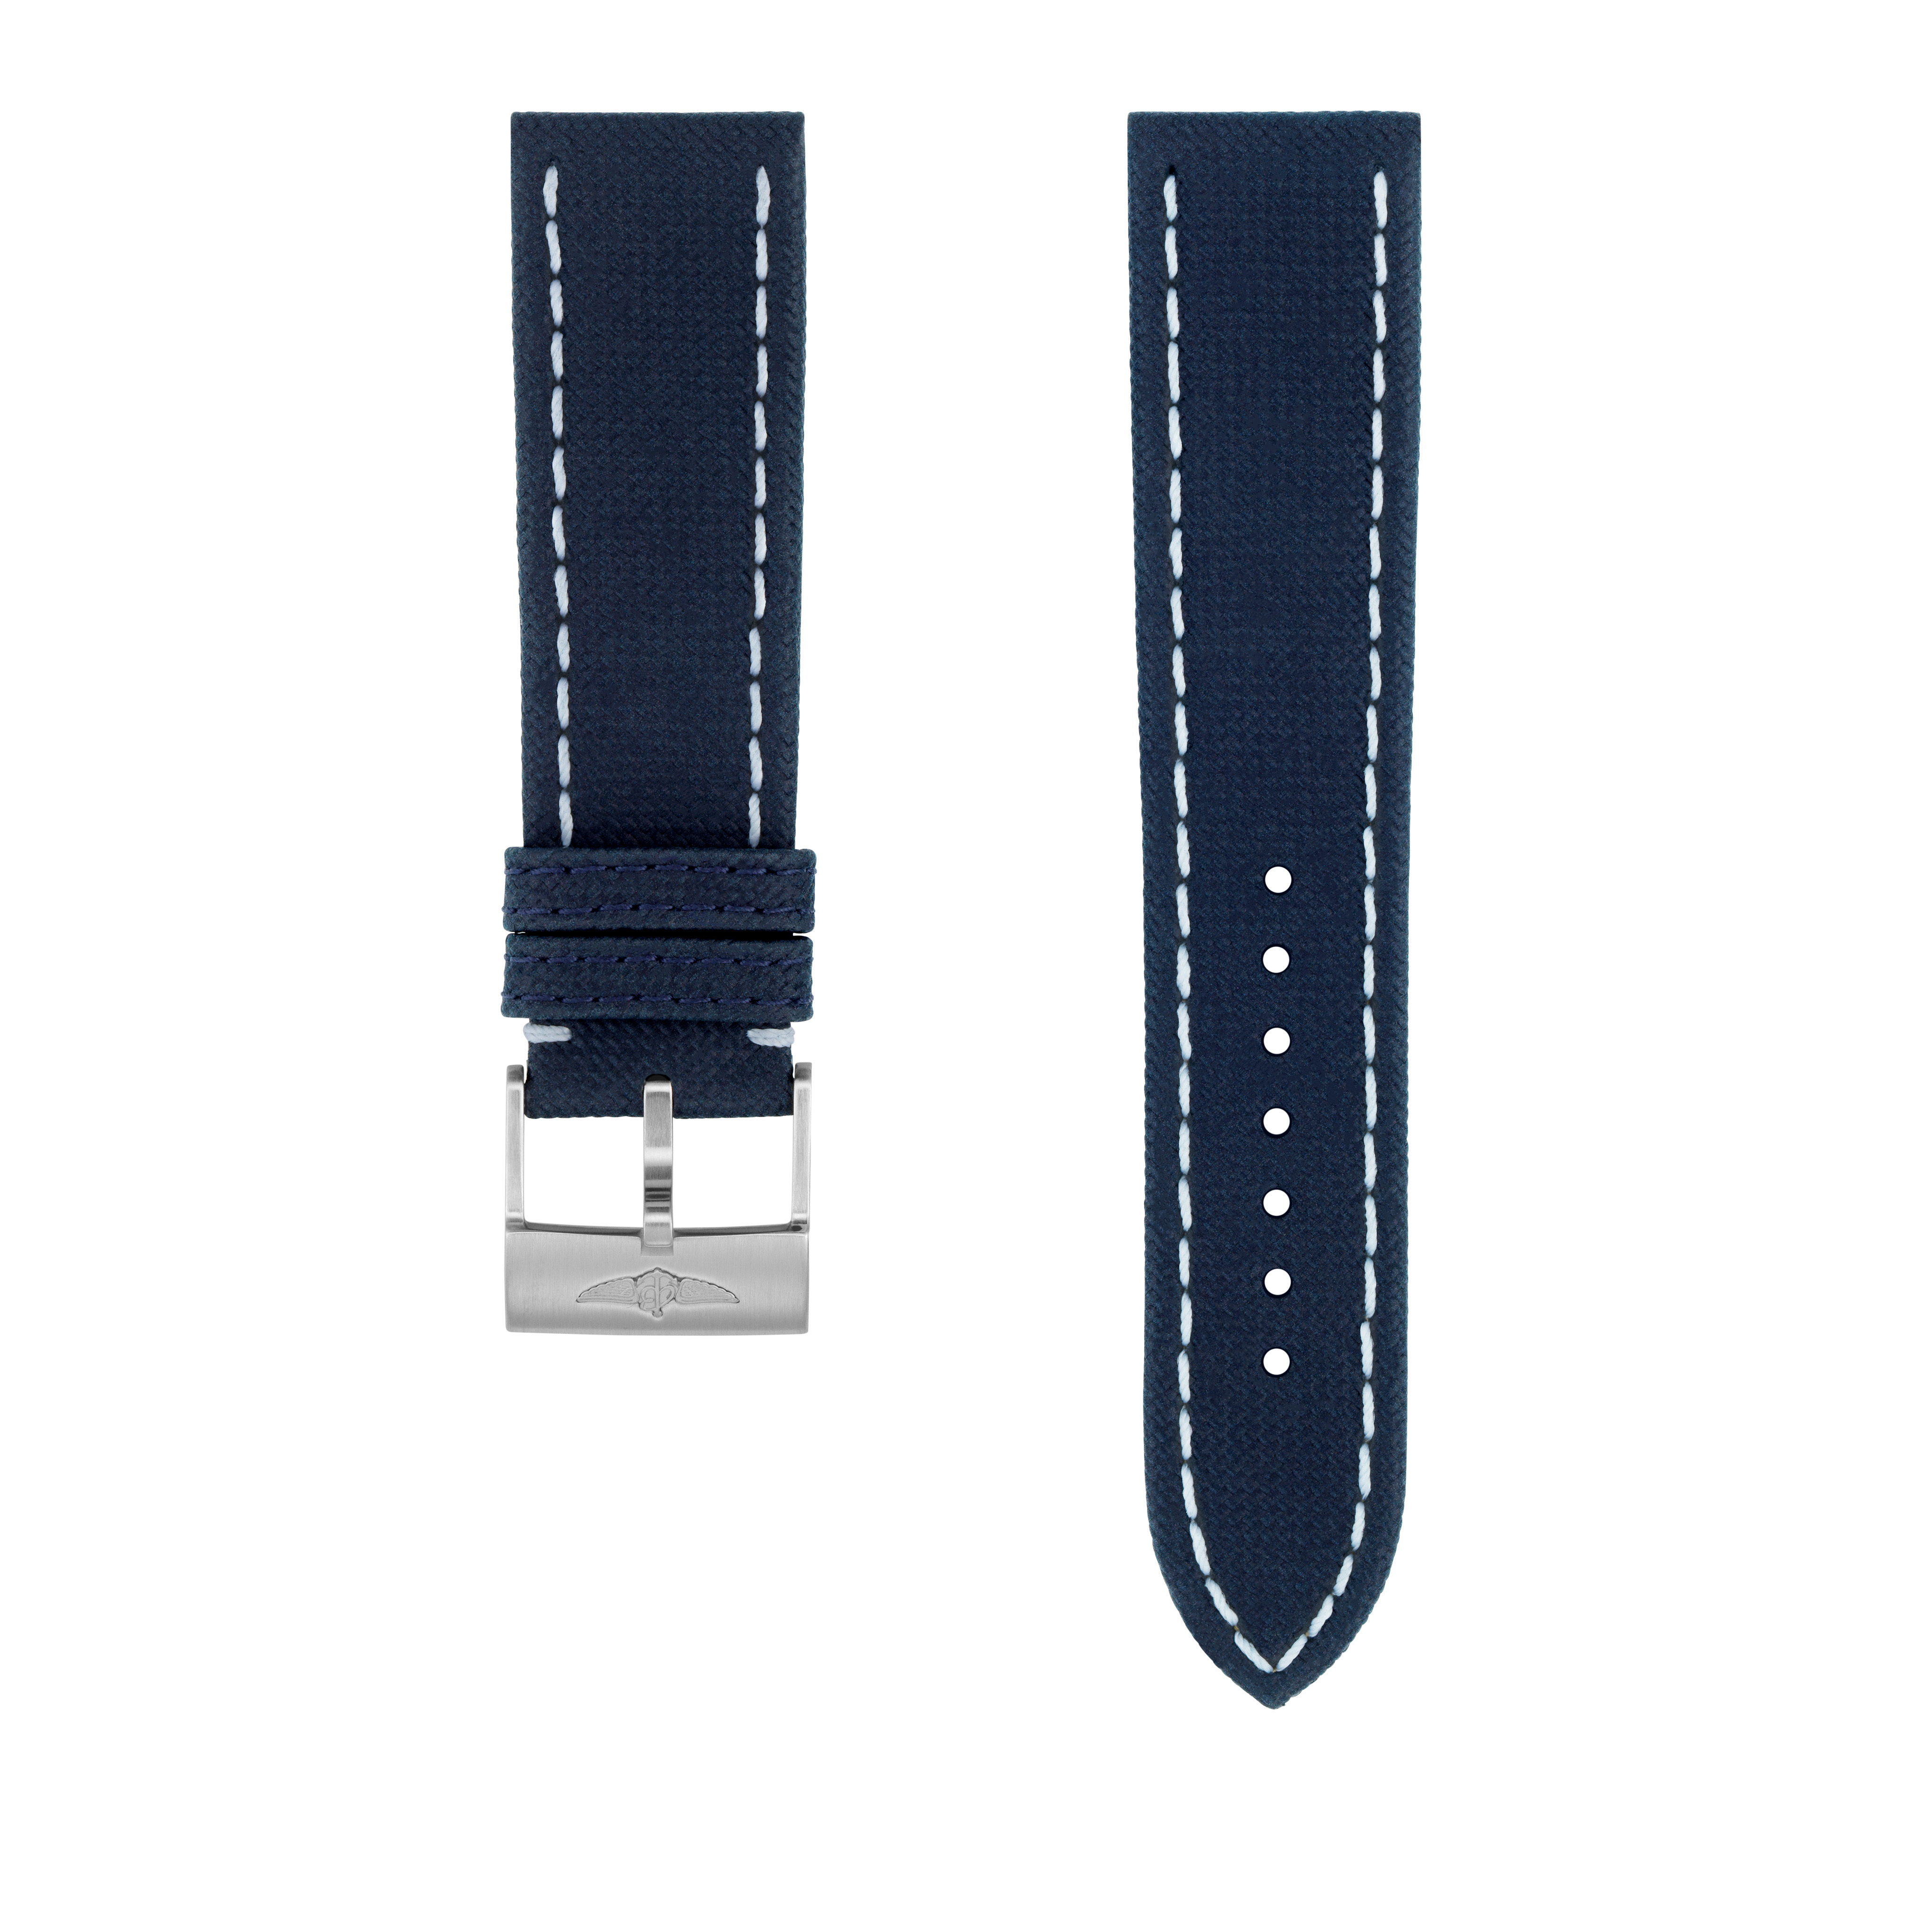 Blue military calfskin leather strap - 22 mm